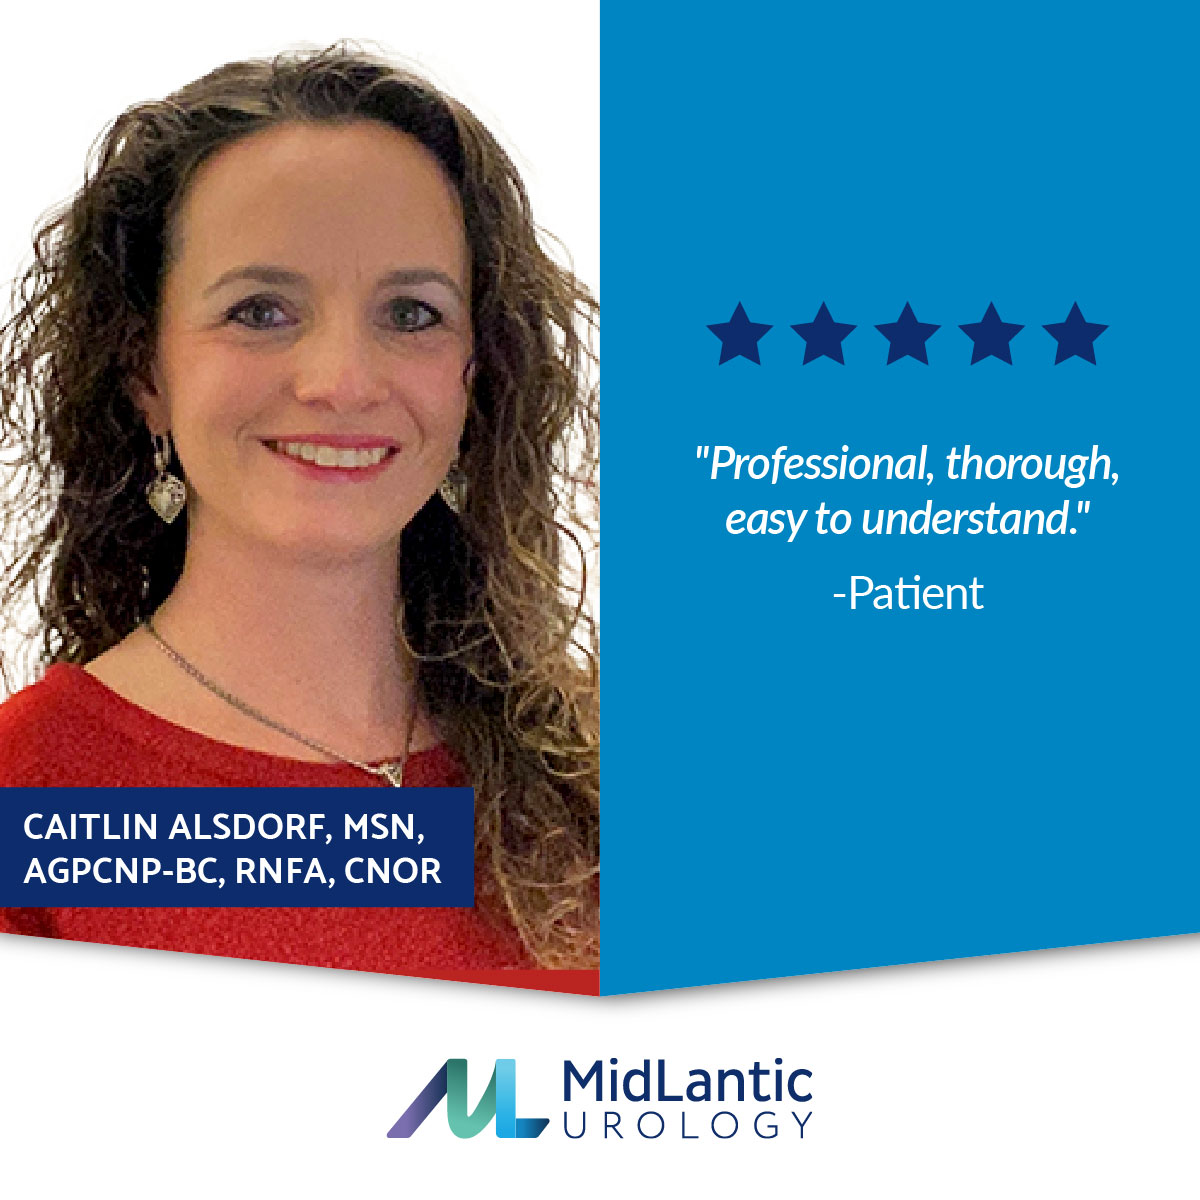 Caitlin Alsdorf, MSN, AGPCNP-BC, RNFA, CNOR, earned her associate, bachelor’s, and master’s degrees in nursing at Gwynedd Mercy College and University. She sees patients at our Masons Mill location. bit.ly/3Wgd5Jf